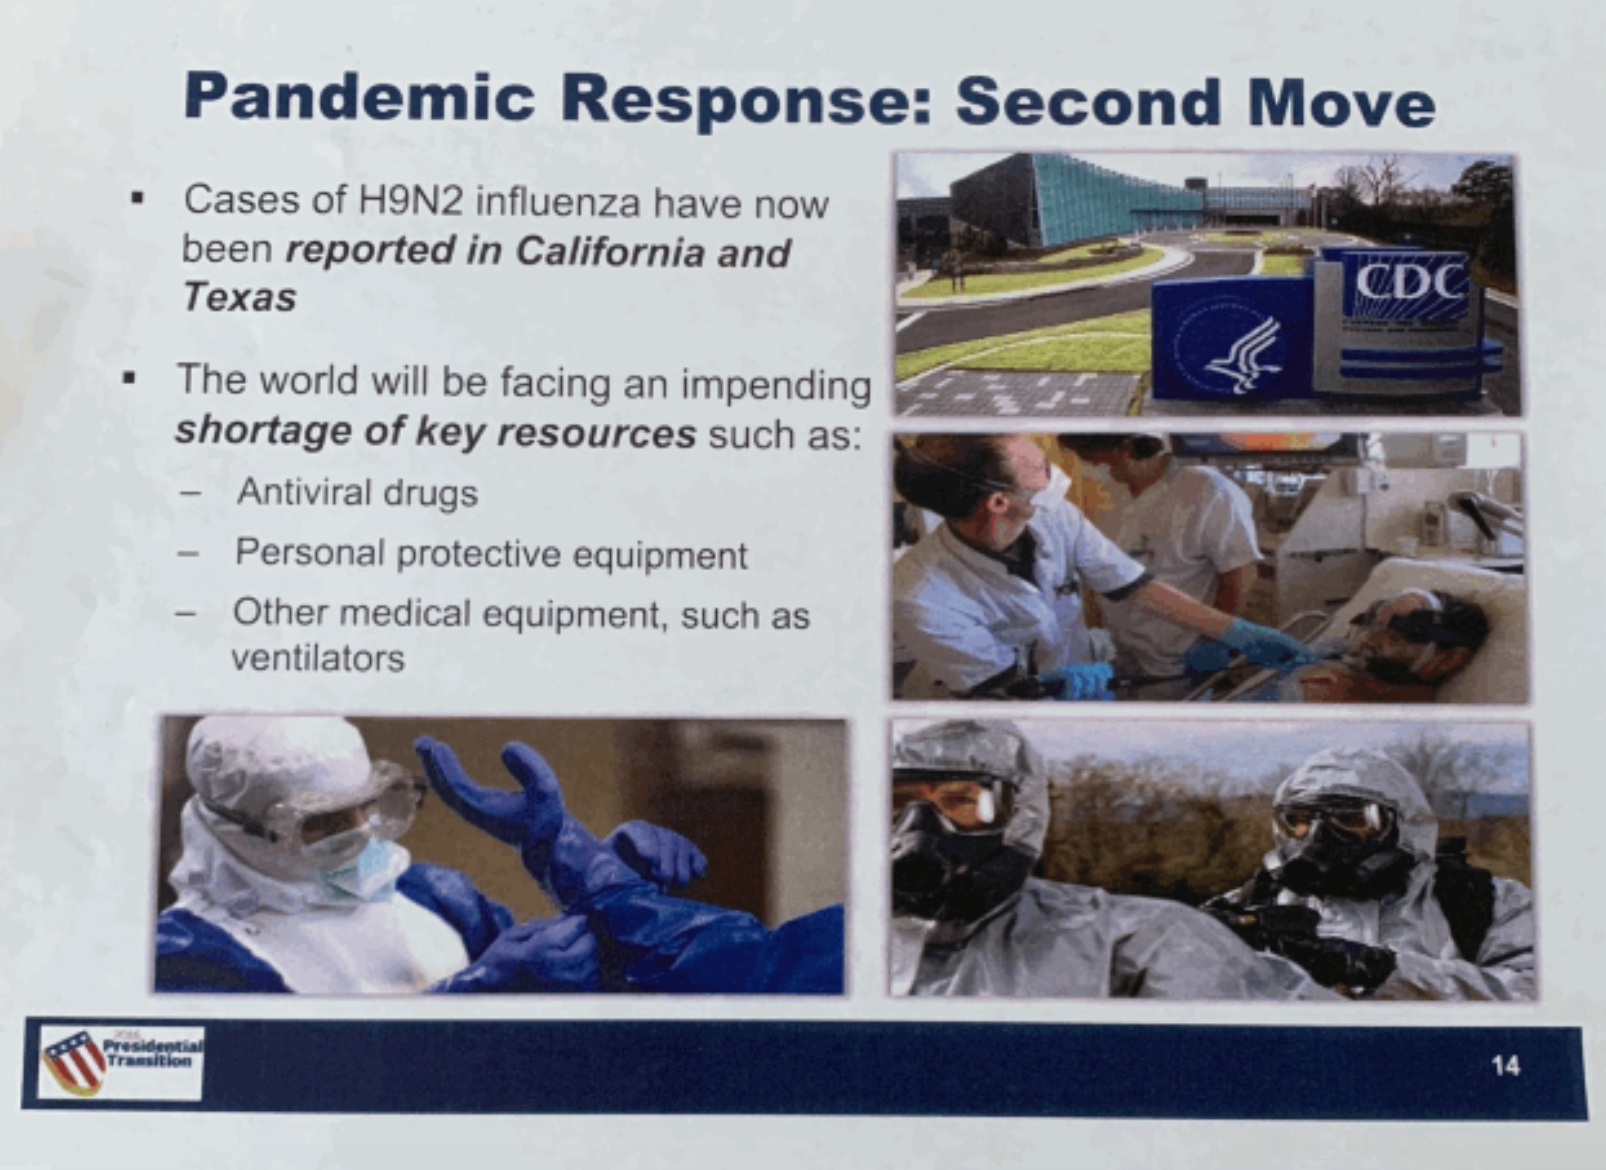 raspberry pi - Pandemic Response Second Move Cases of H9N2 influenza have now been reported in California and Texas Cdc The world will be facing an impending shortage of key resources such as Antiviral drugs Personal protective equipment Other medical equ